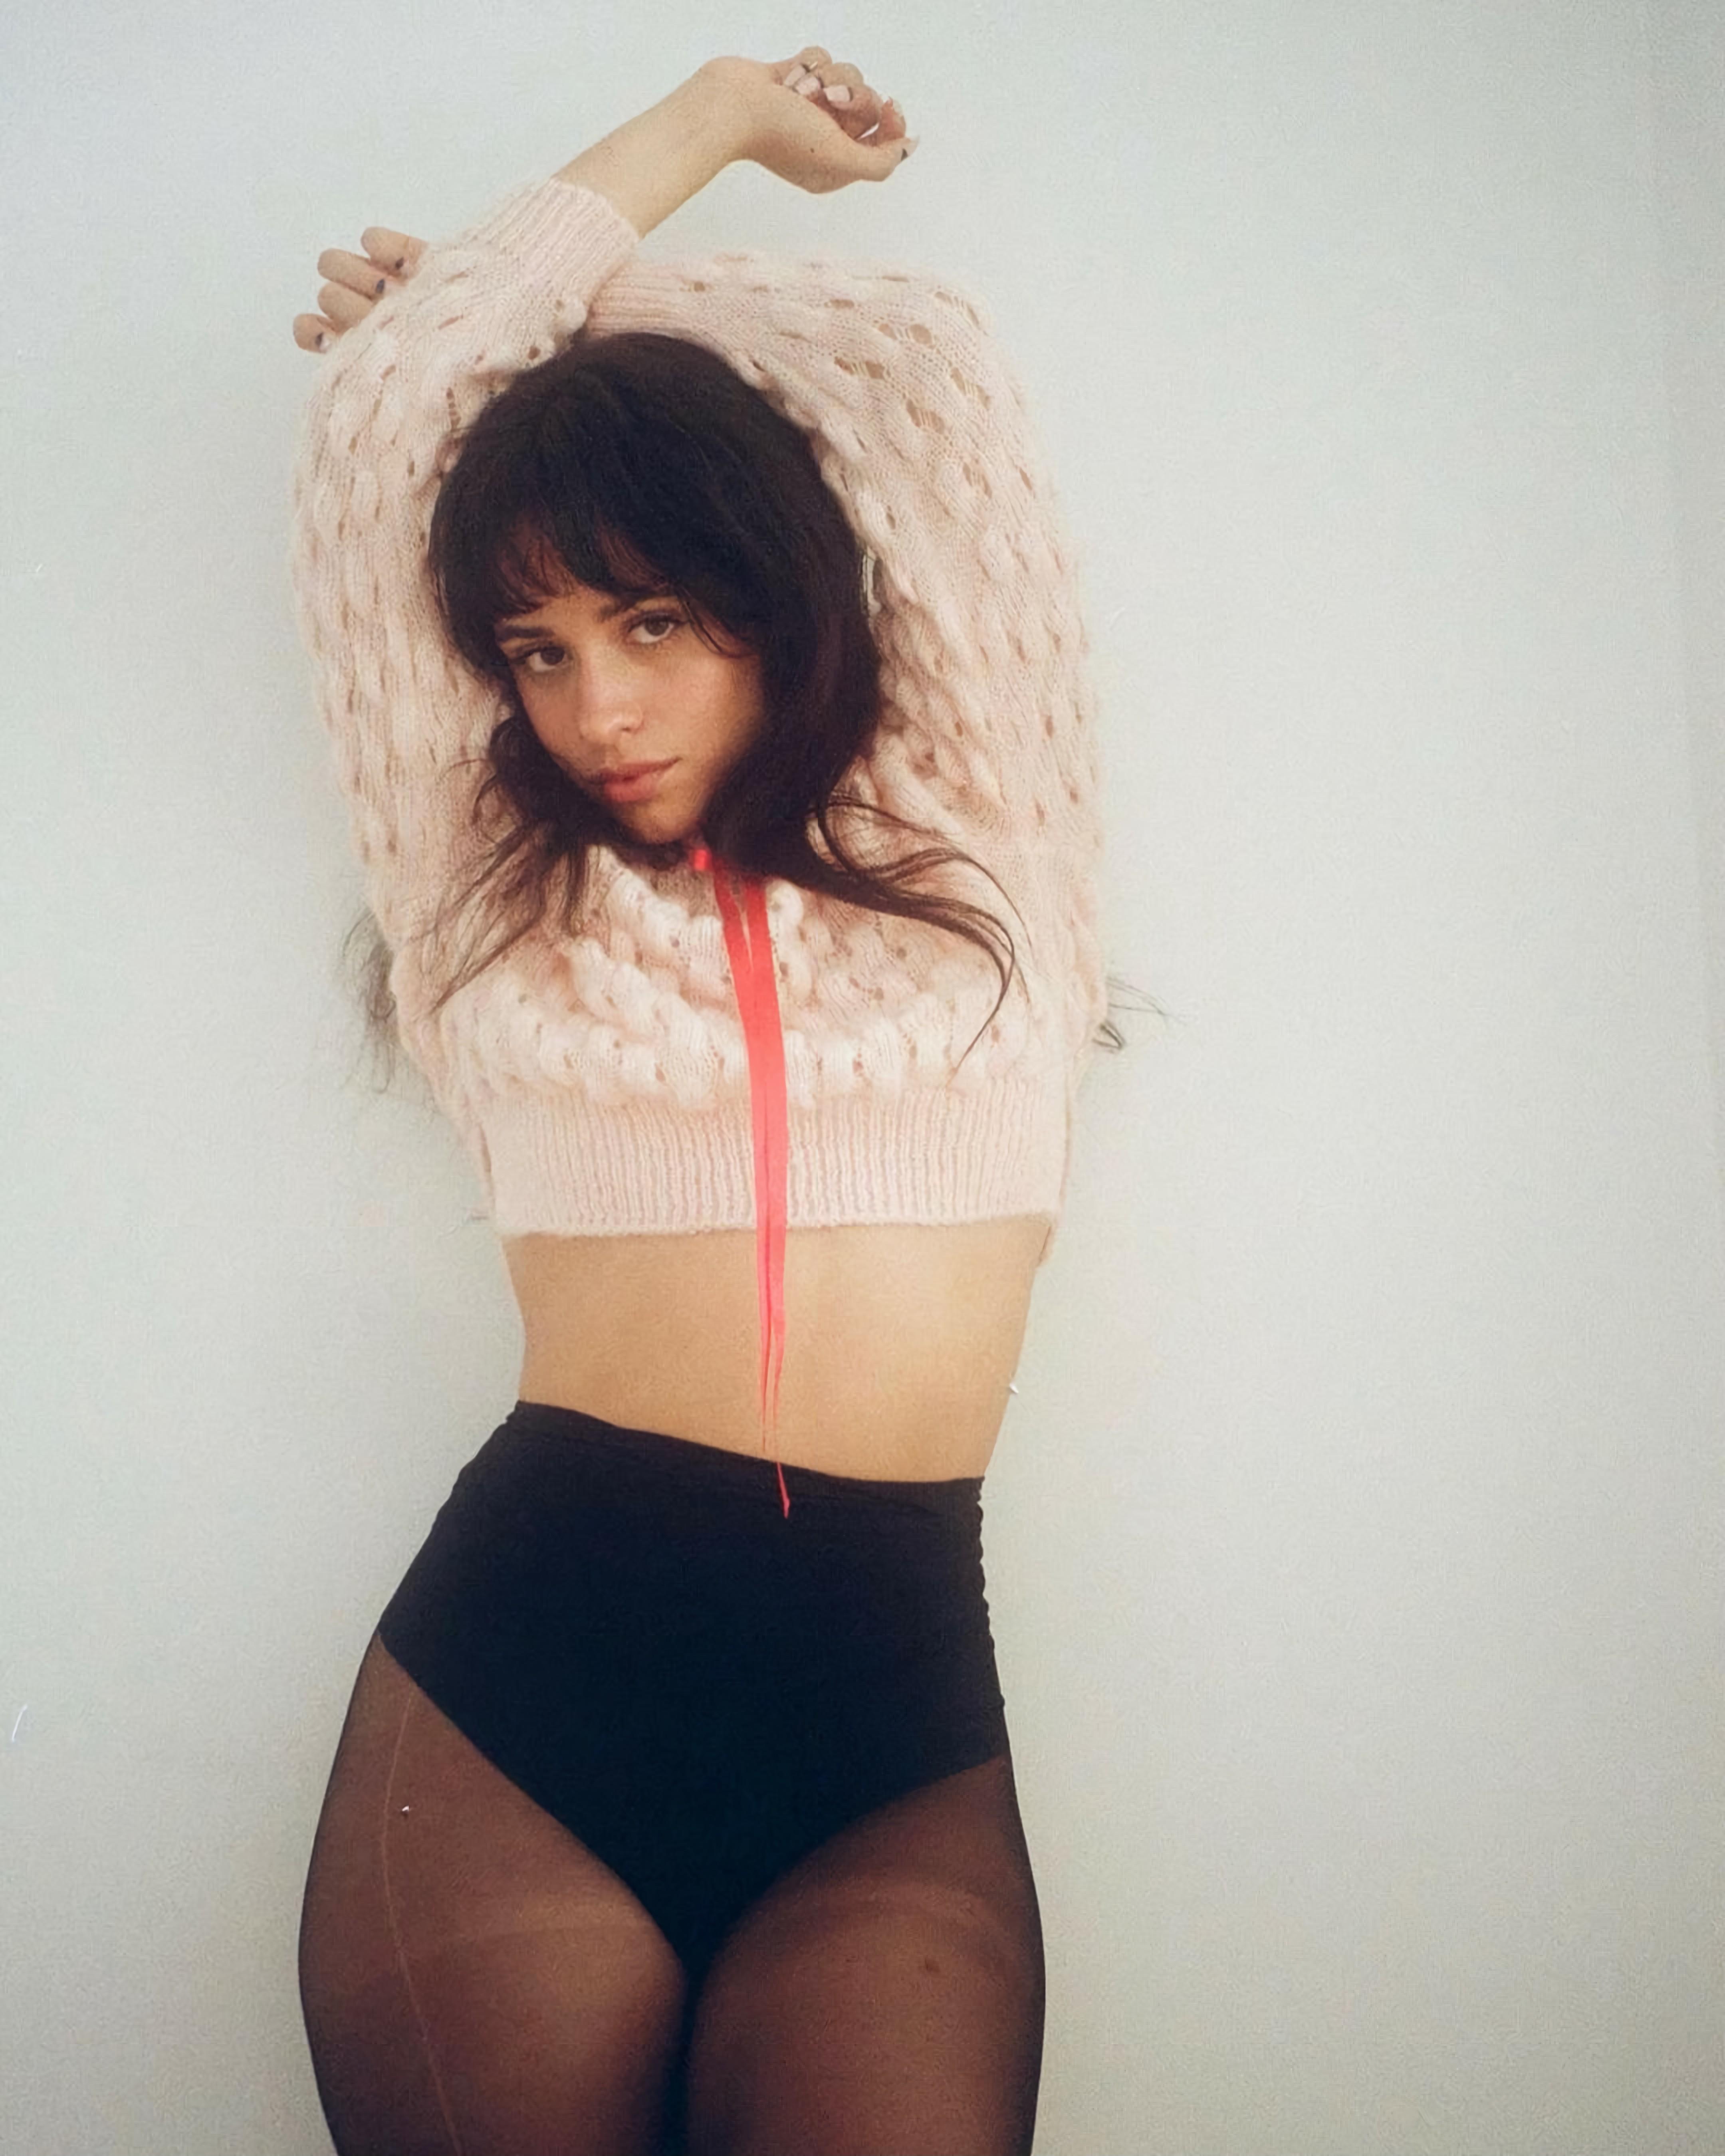 Camila Cabello Shows Off in a Crop Top and Stockings! - Photo 2